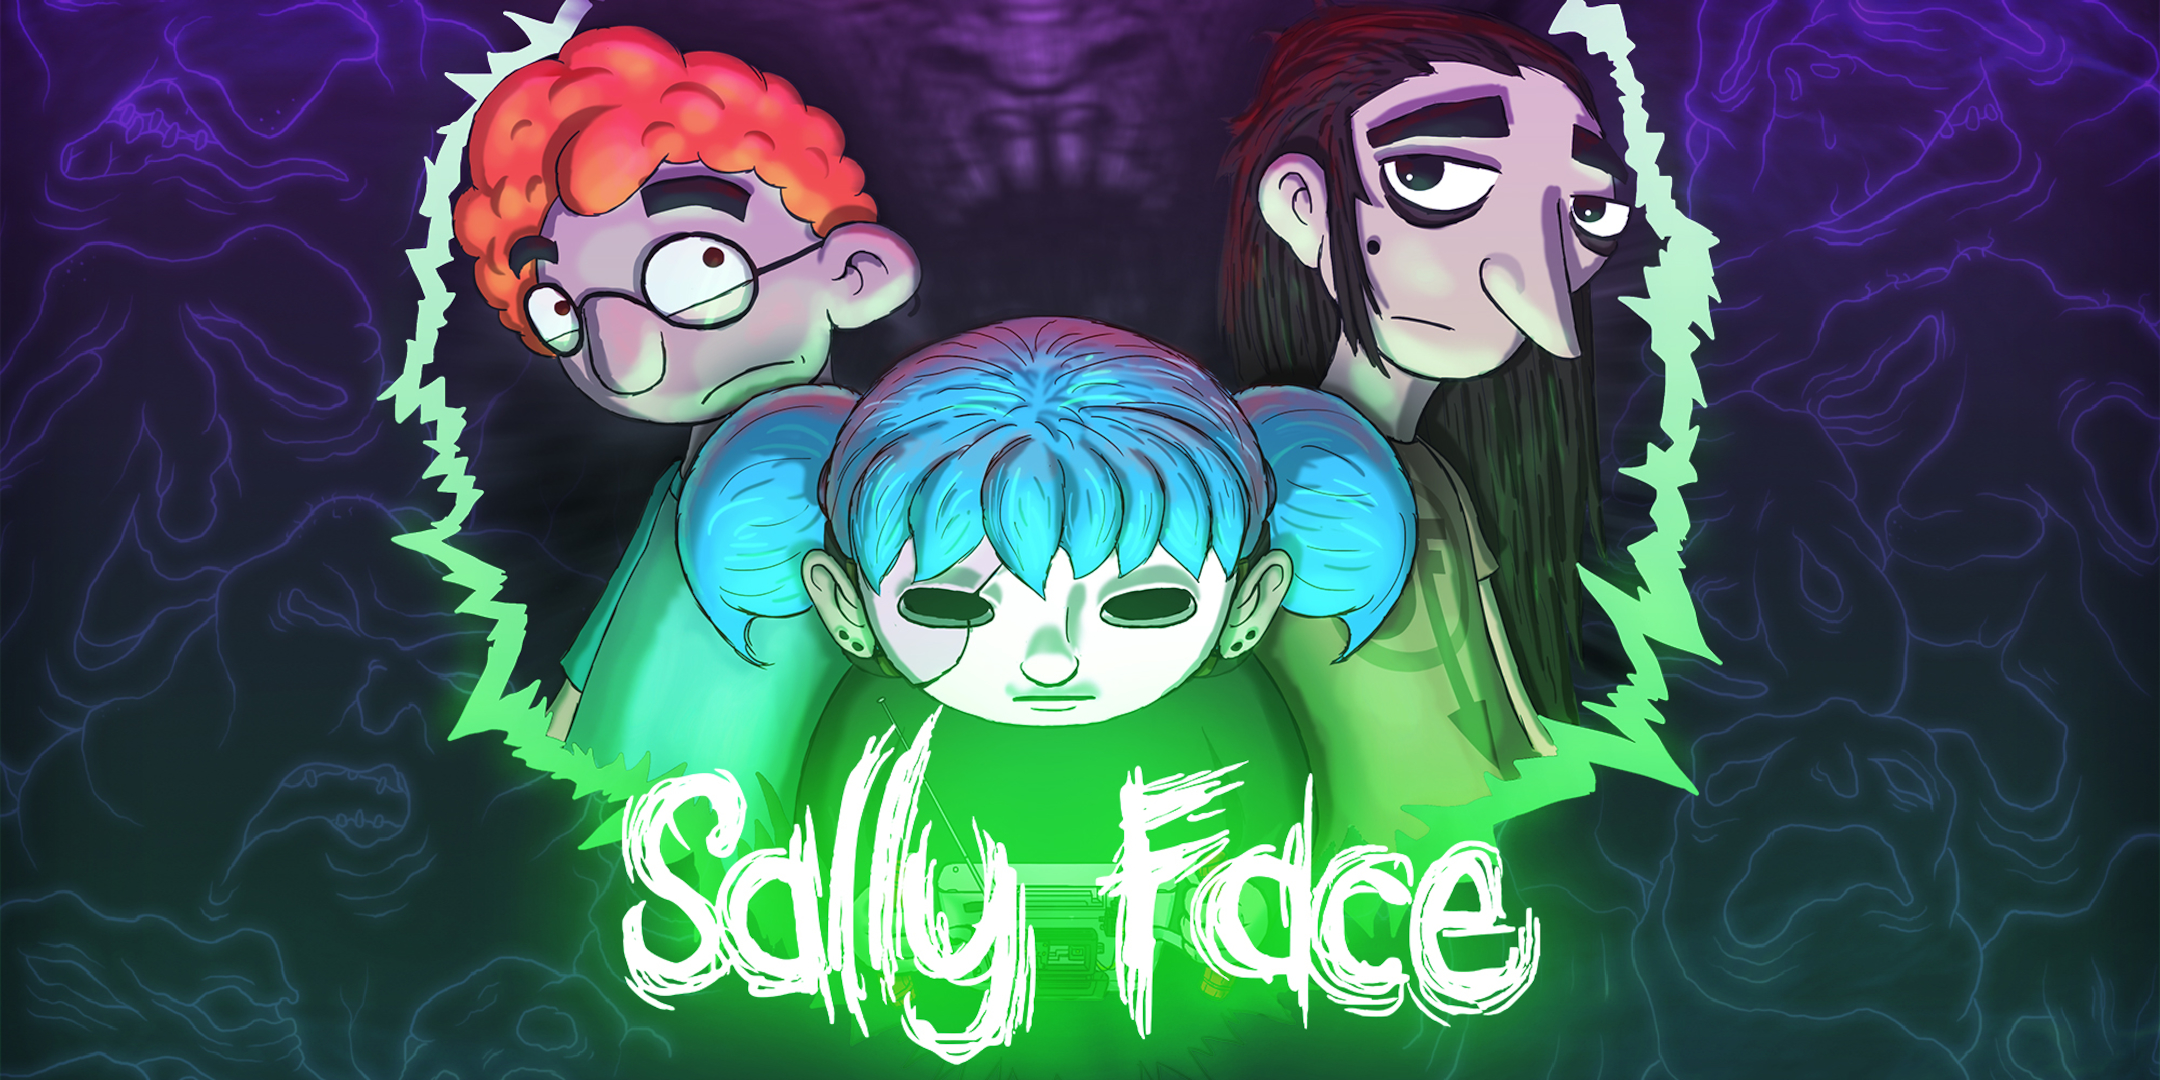 Sally Face wallpaper by Vipolu  Download on ZEDGE  390f